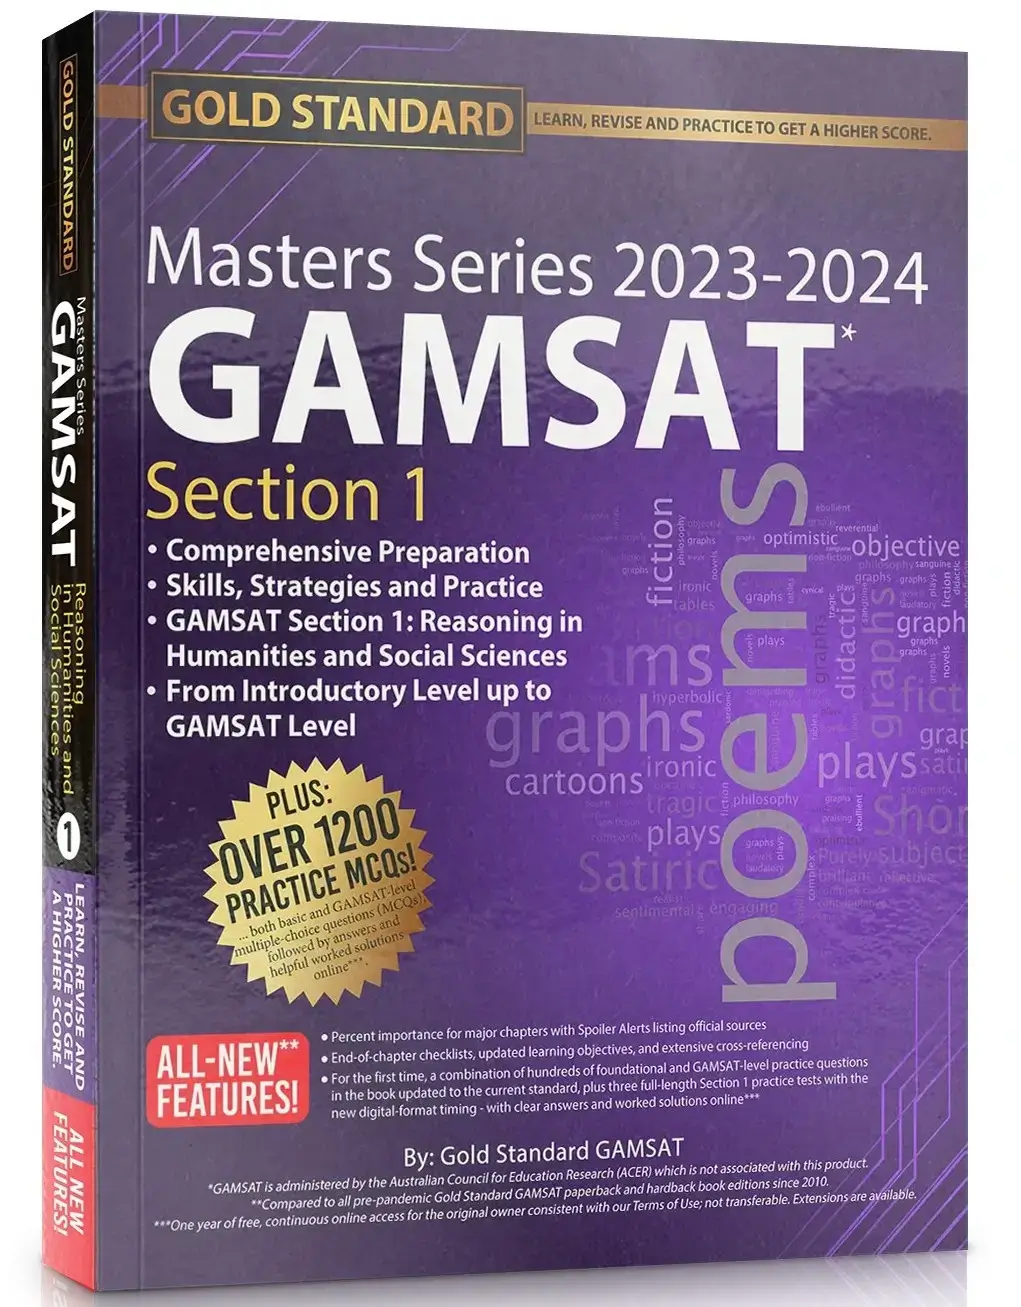 NEW 2023-2024 GAMSAT Masters Series Section 1